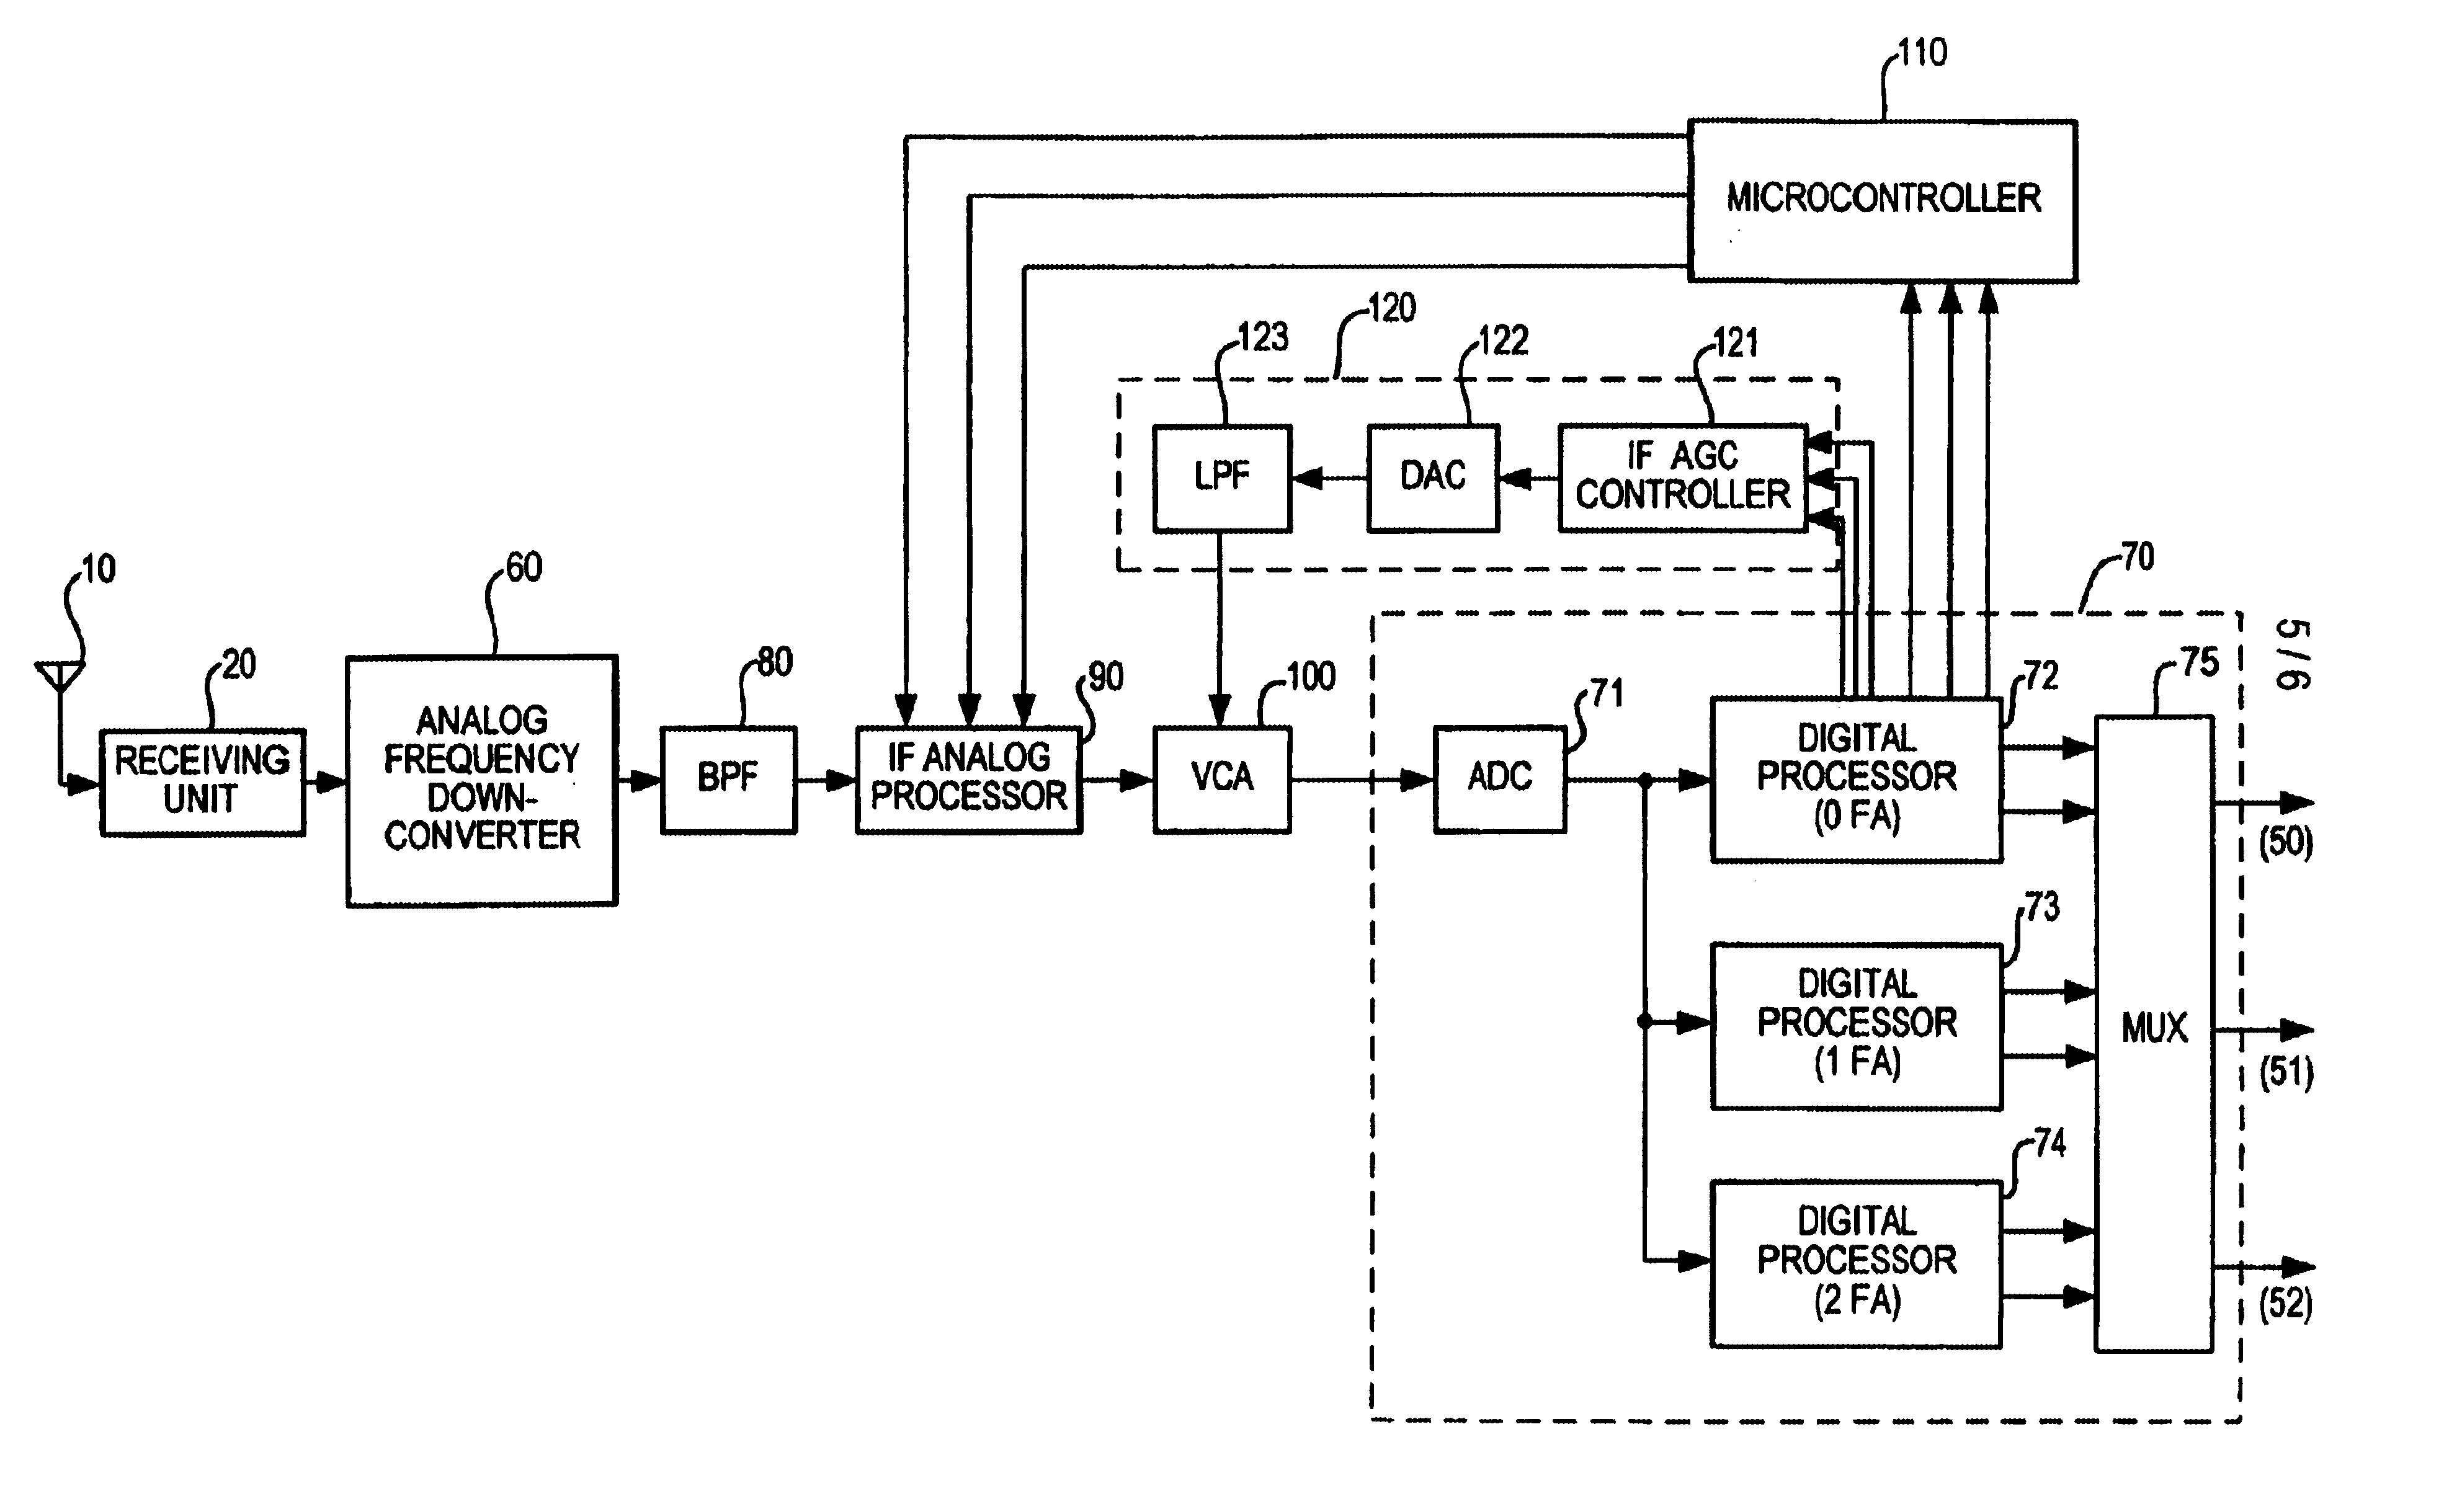 Control device for controlling power level between frequency assignment in radio frequency receiving device of mobile radio communication base station system in CDMA system